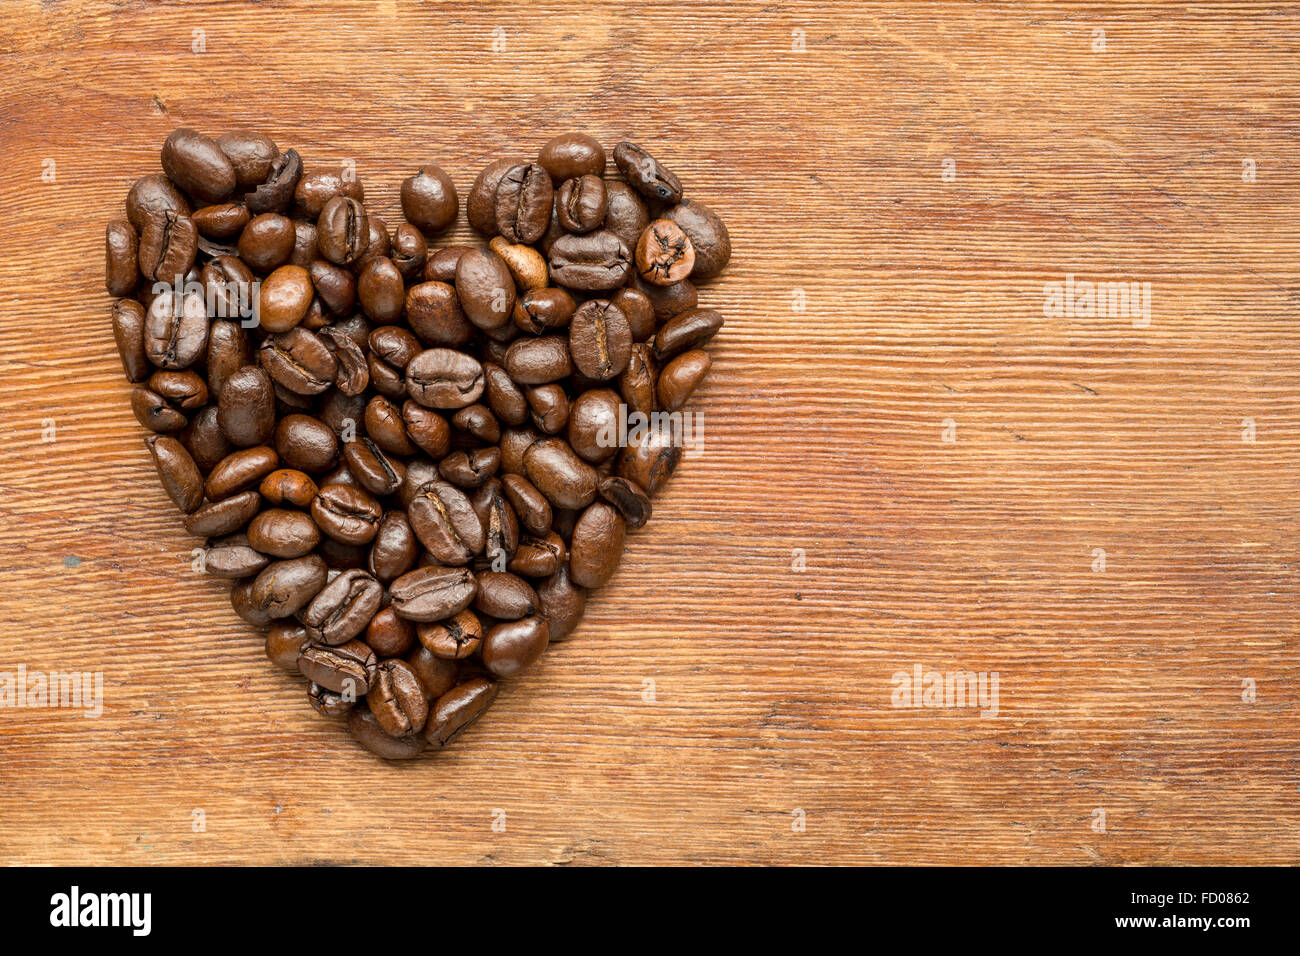 coffee heart symbol made from roasted grains on vintage wooden surface Stock Photo